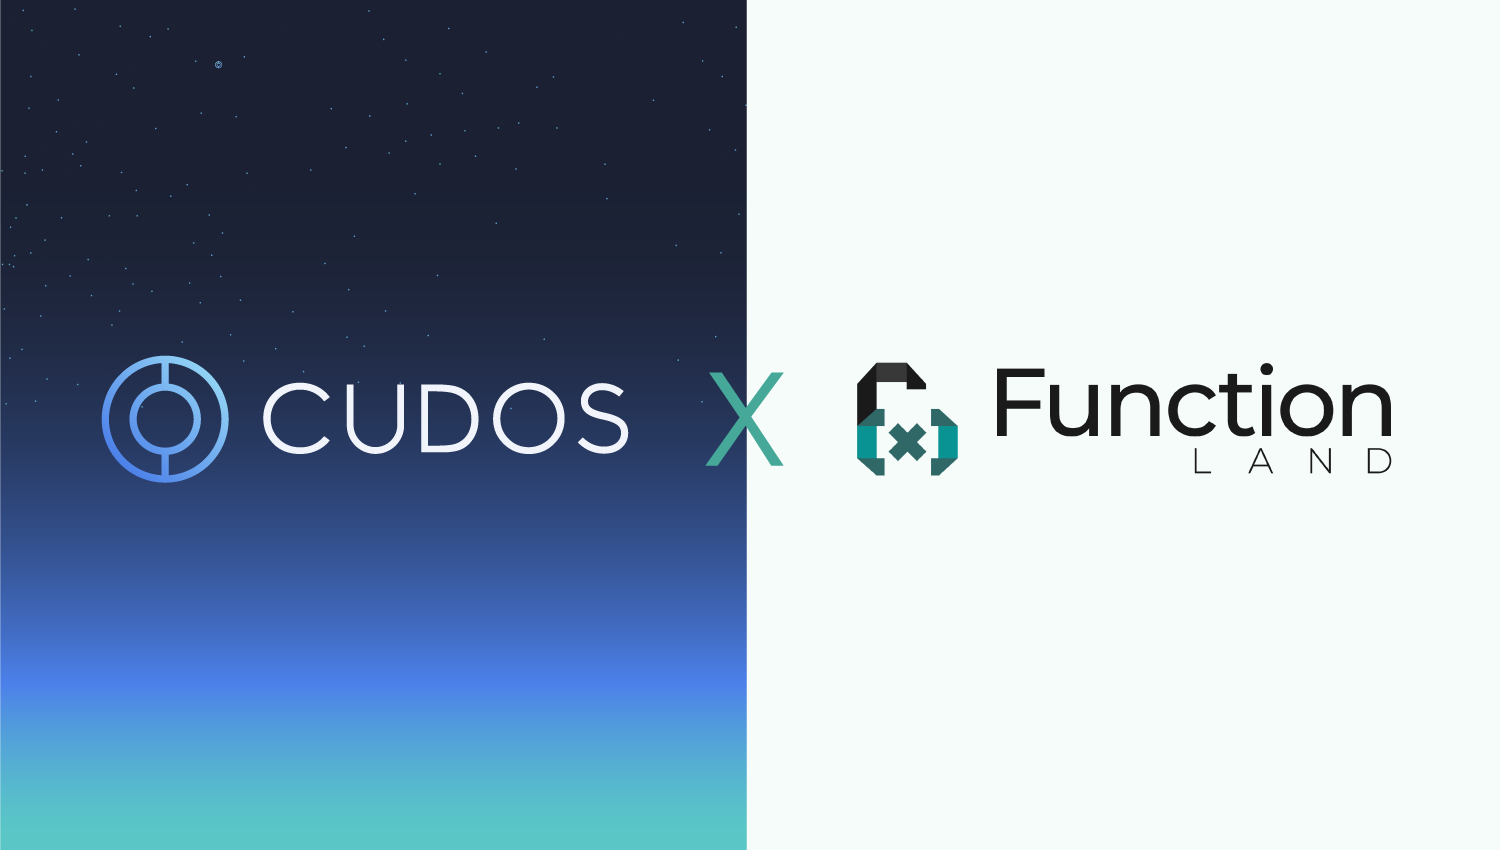 Cudos partner Functionland announces its hardware launch